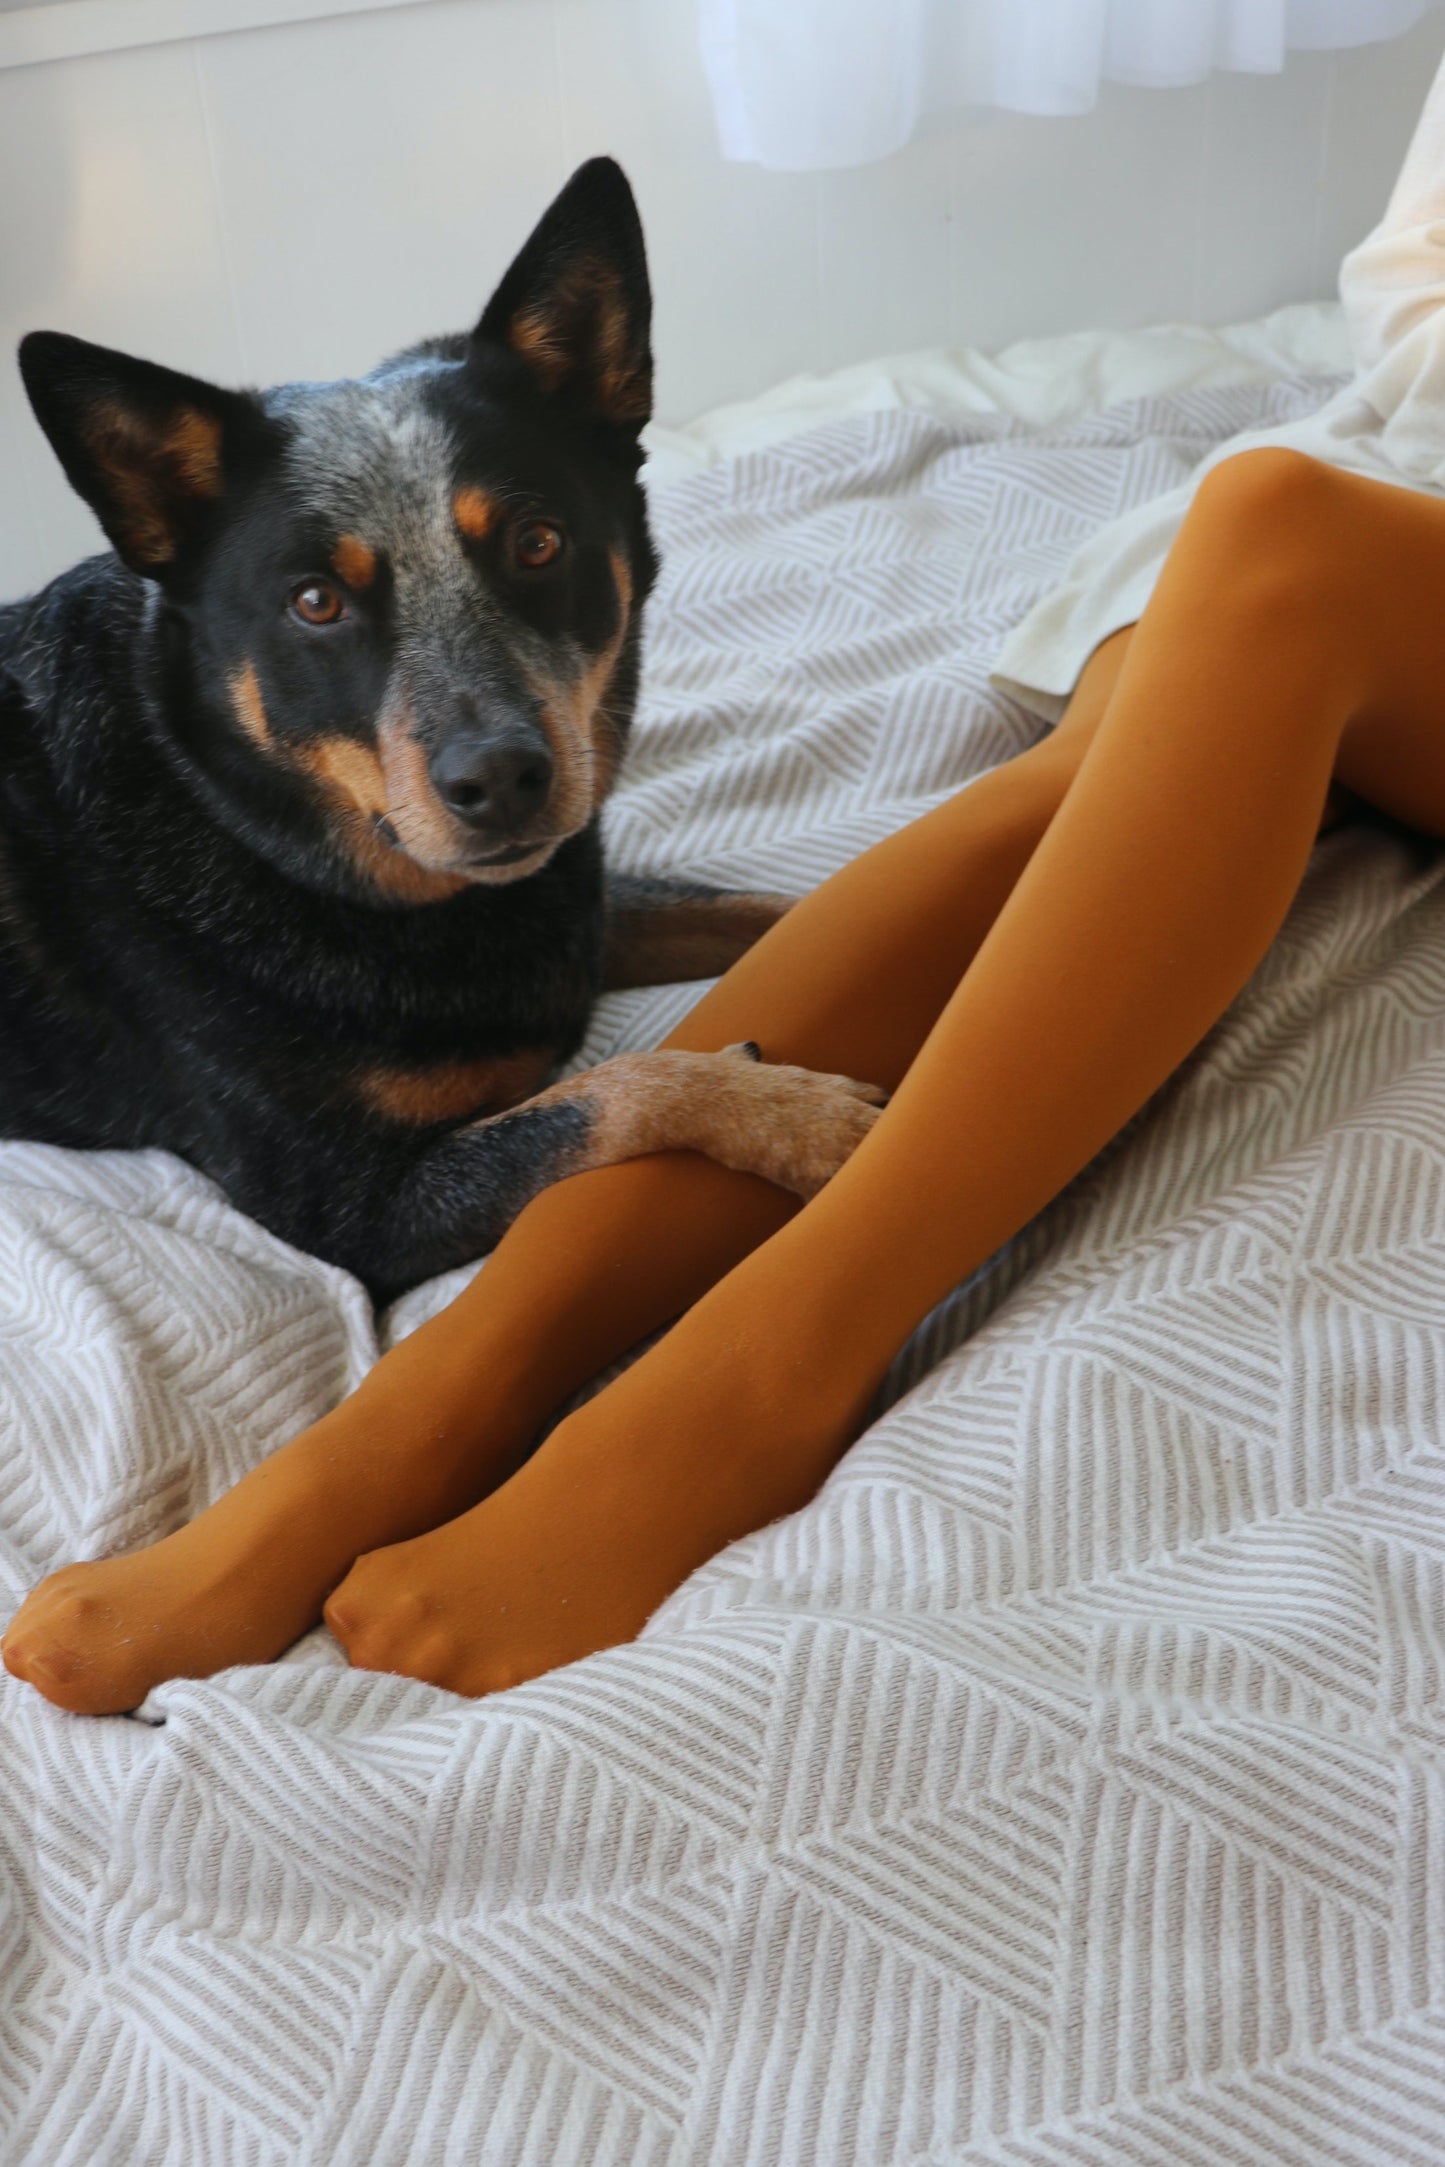 Dog with the girl.She is wearing yellow opaque tights.